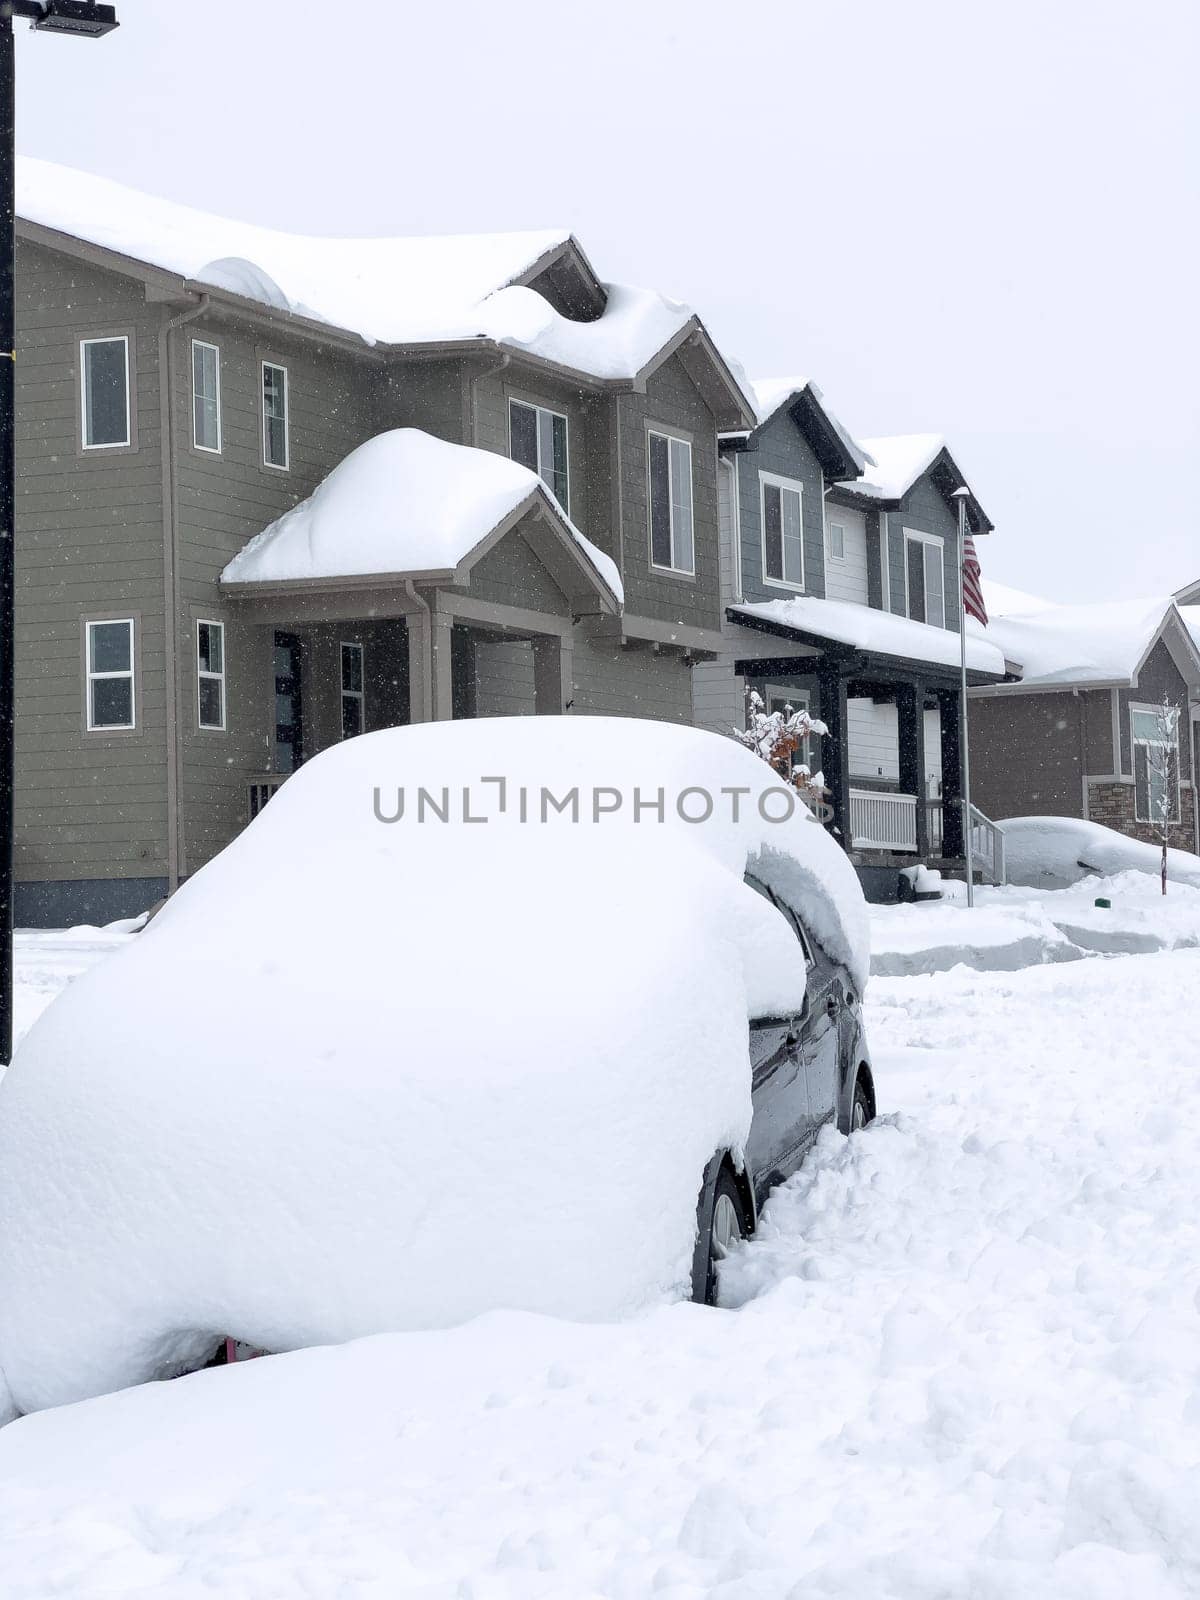 Winters Blanket Covers Car and Townhouses by arinahabich